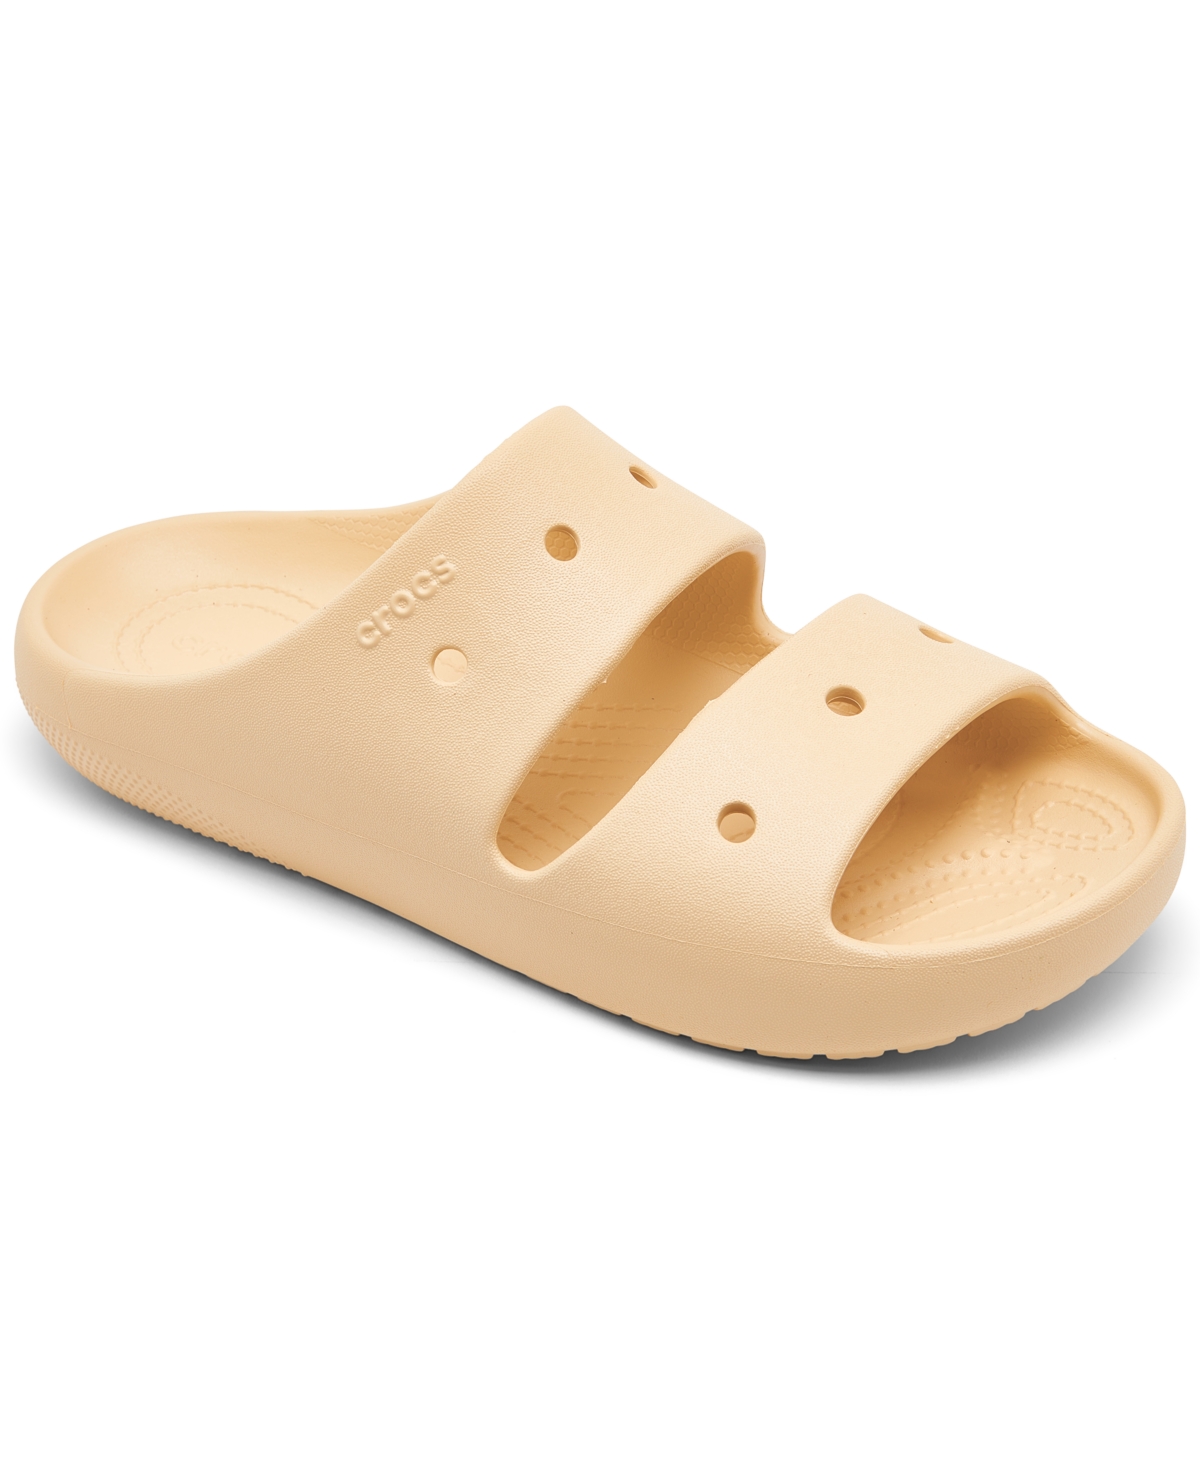 Men's and Women's 2.0 Classic Slide Sandals from Finish Line - Shitake